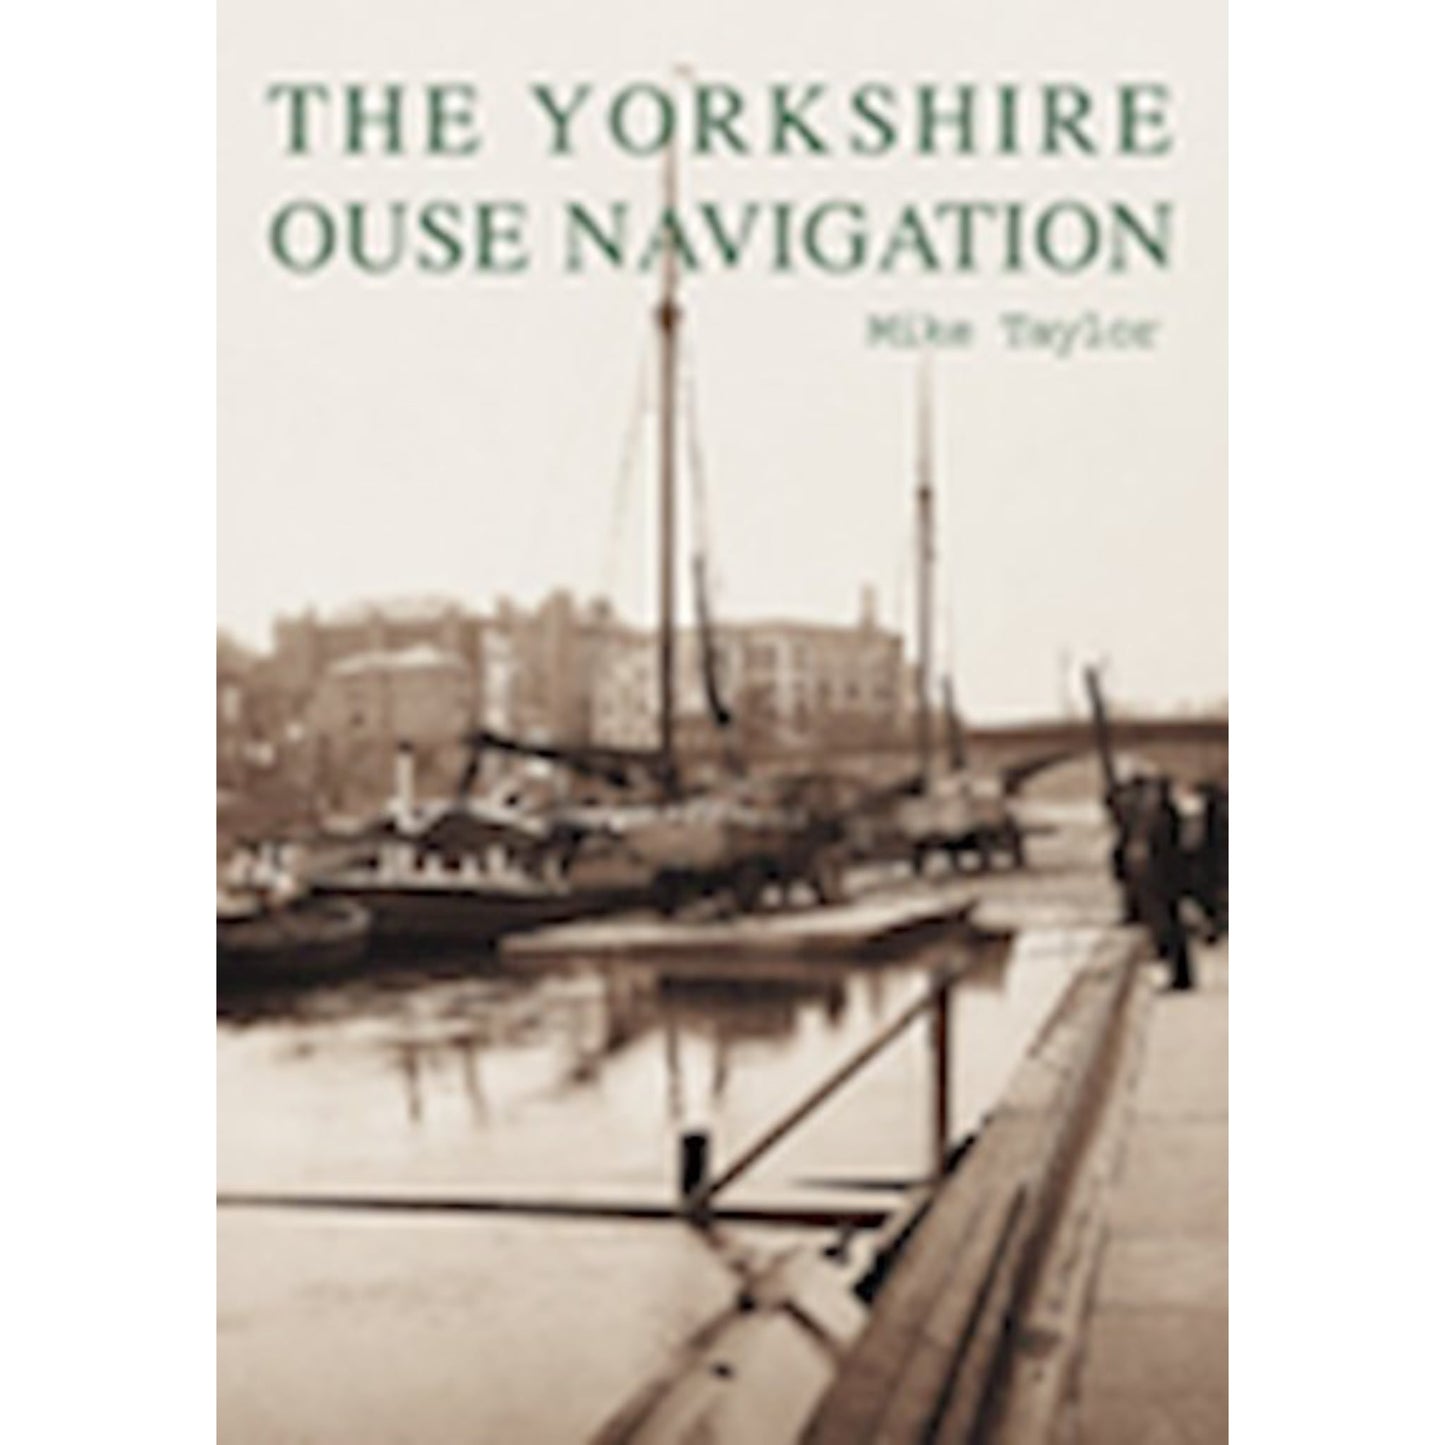 Load image into Gallery viewer, The Yorkshire Ouse Navigation Book - The Great Yorkshire Shop
